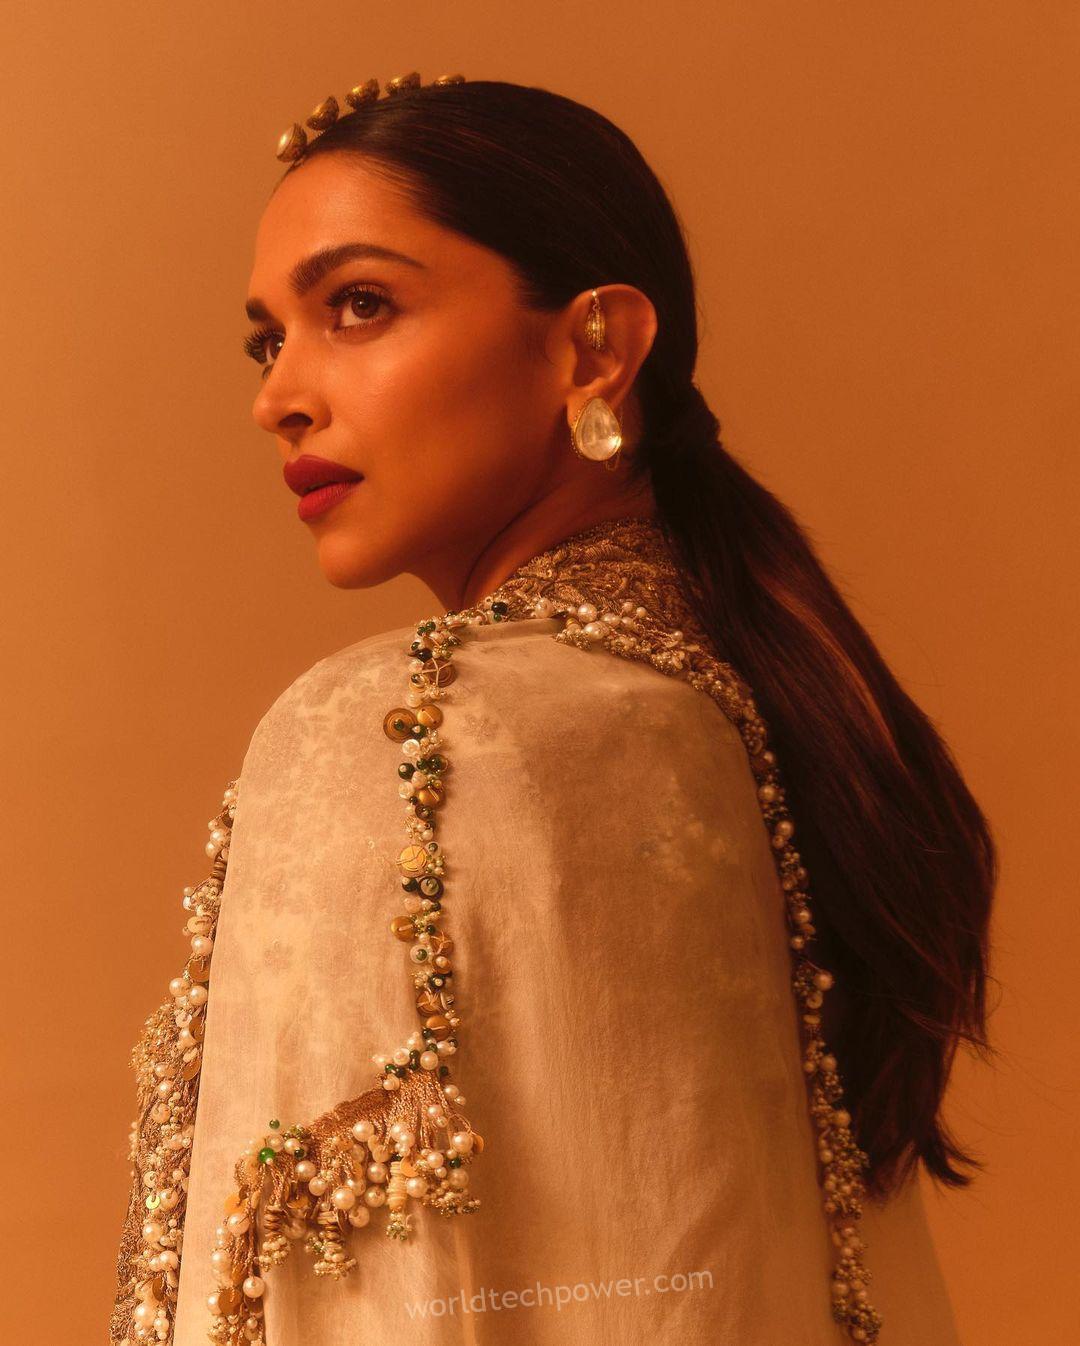 338713770 872244443878847 8615860444837023566 n – 5 Instances Deepika Padukone Notched Her Outfit Up By Gorgeous Earrings – World Tech Power